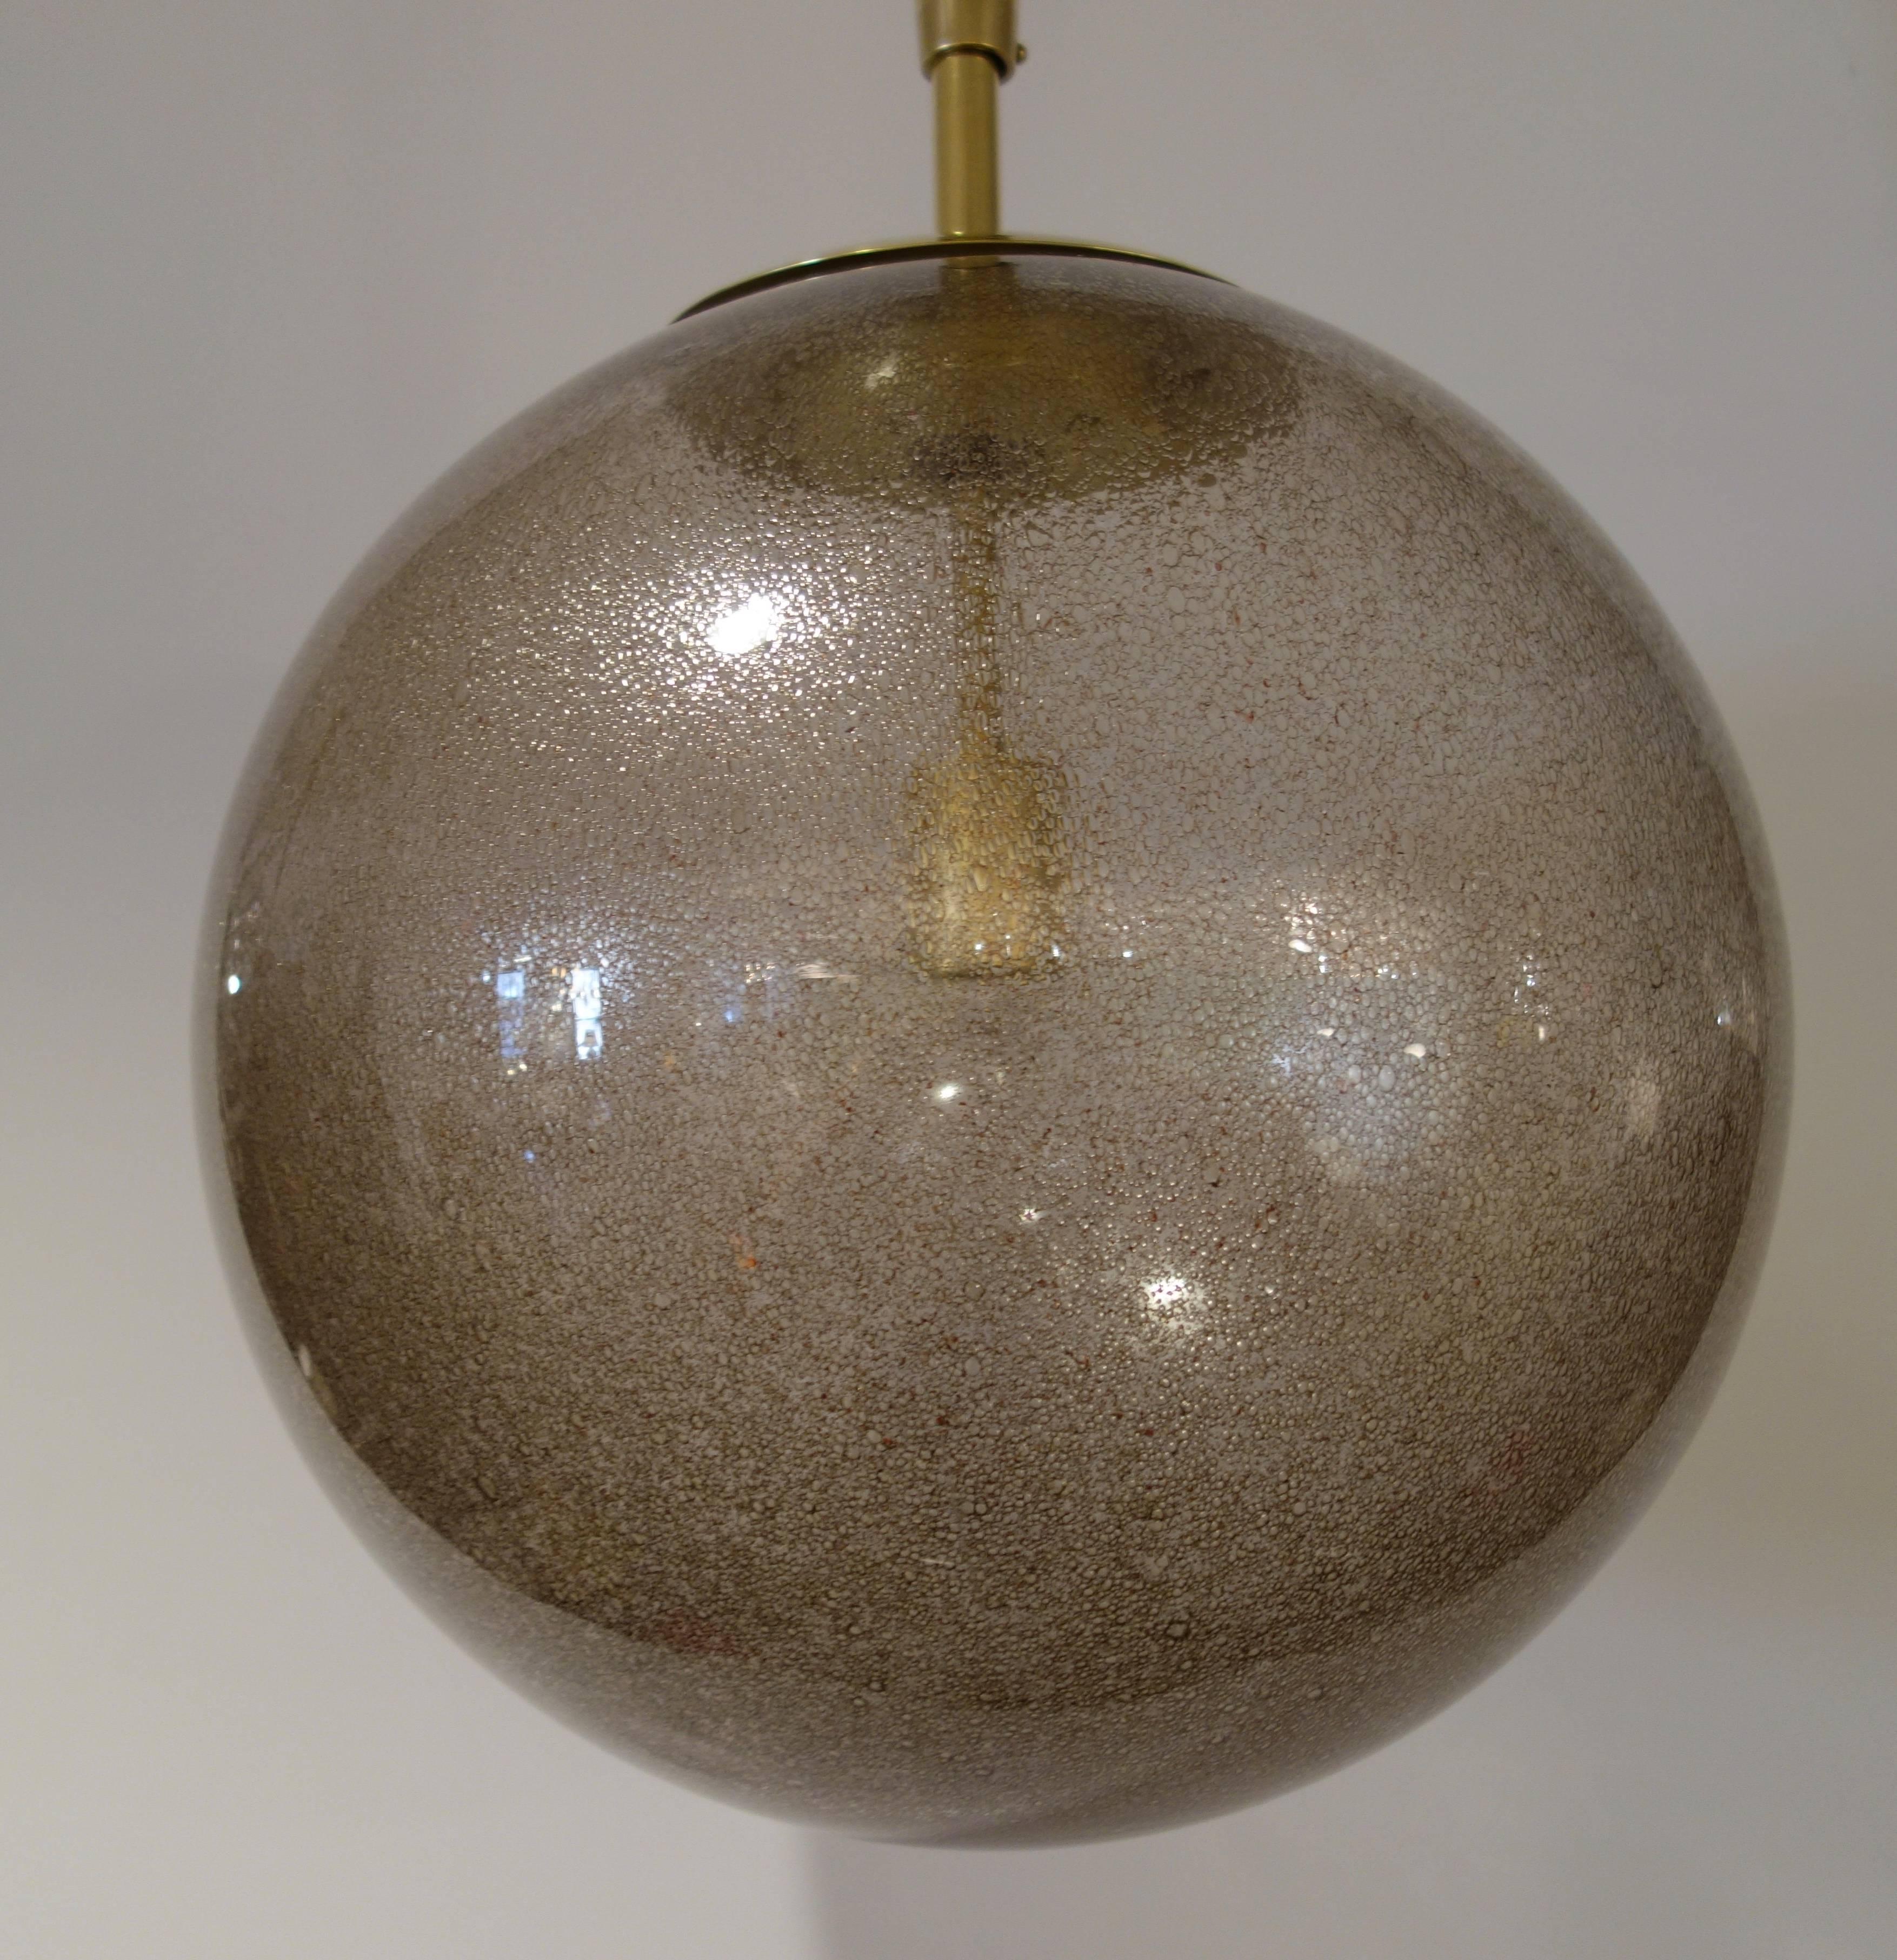 A large Mid-Century globe or chandelier of thick bronze toned handblown Murano glass with all-over small bubbles creating a sparkling effect when lit suspended from a custom conical brass shaft and canopy newly wired for the American market